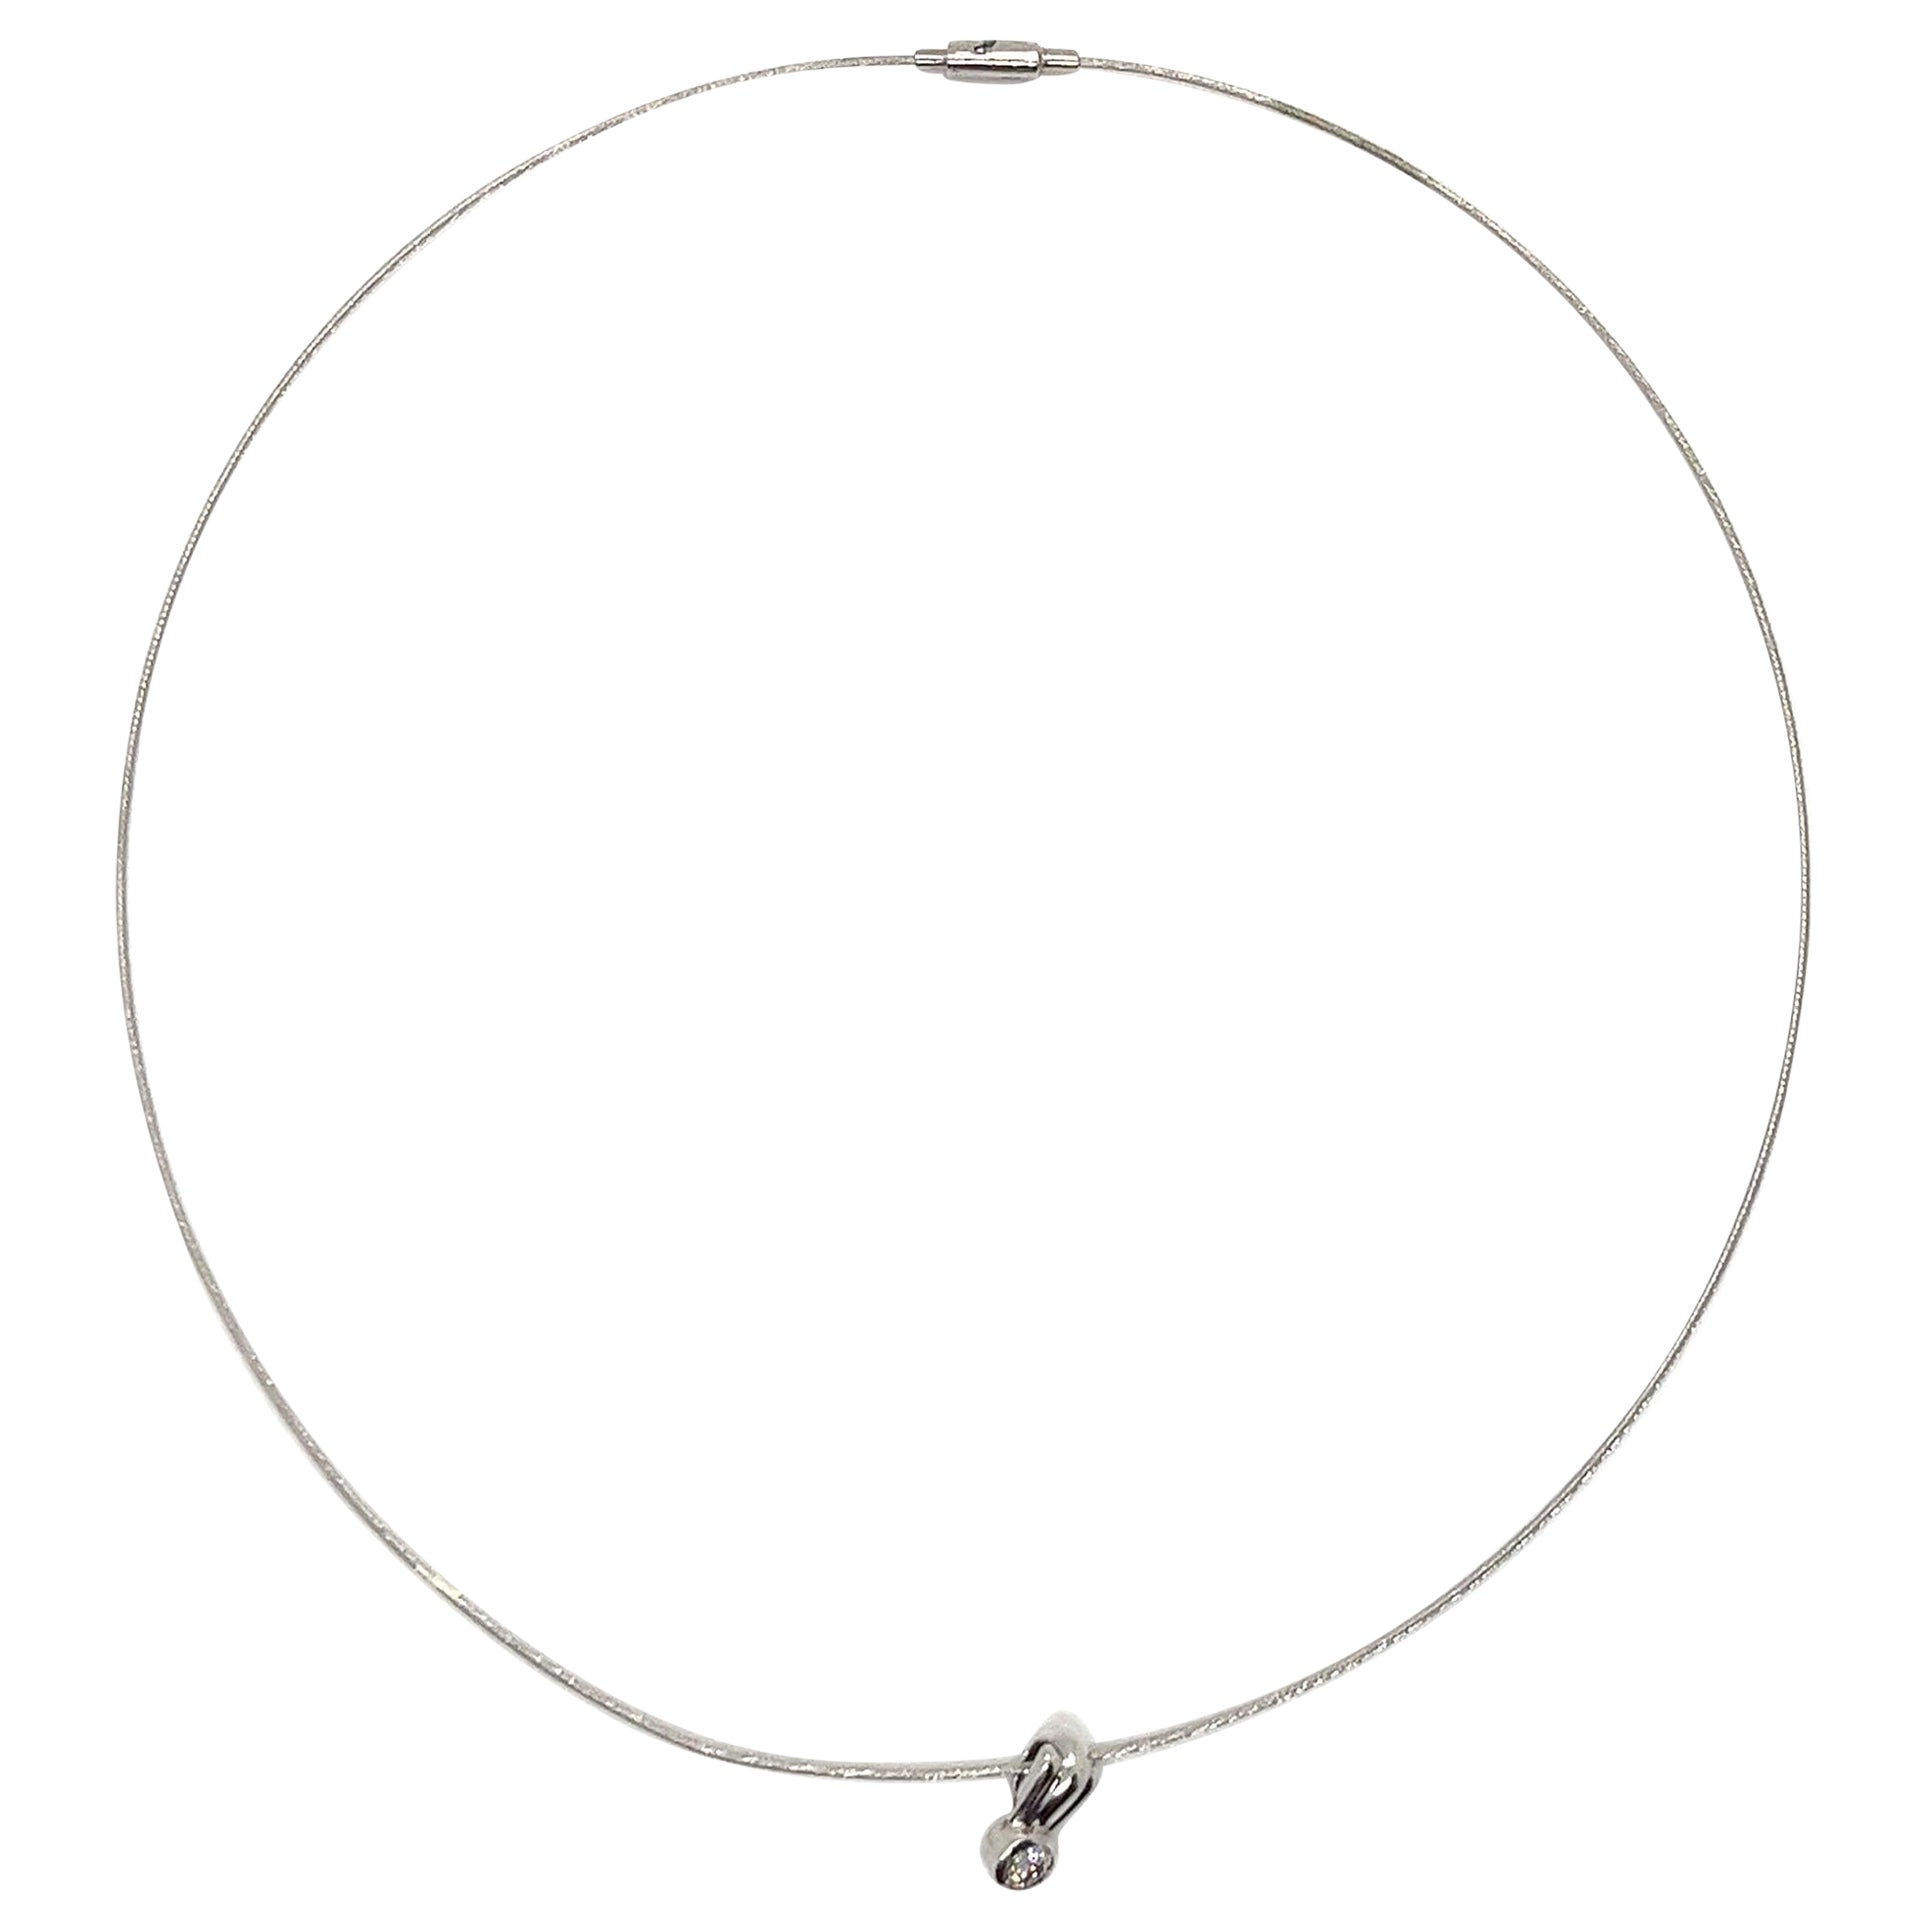 14K White Gold Wire Collar with Diamond Slide Pendant Necklace